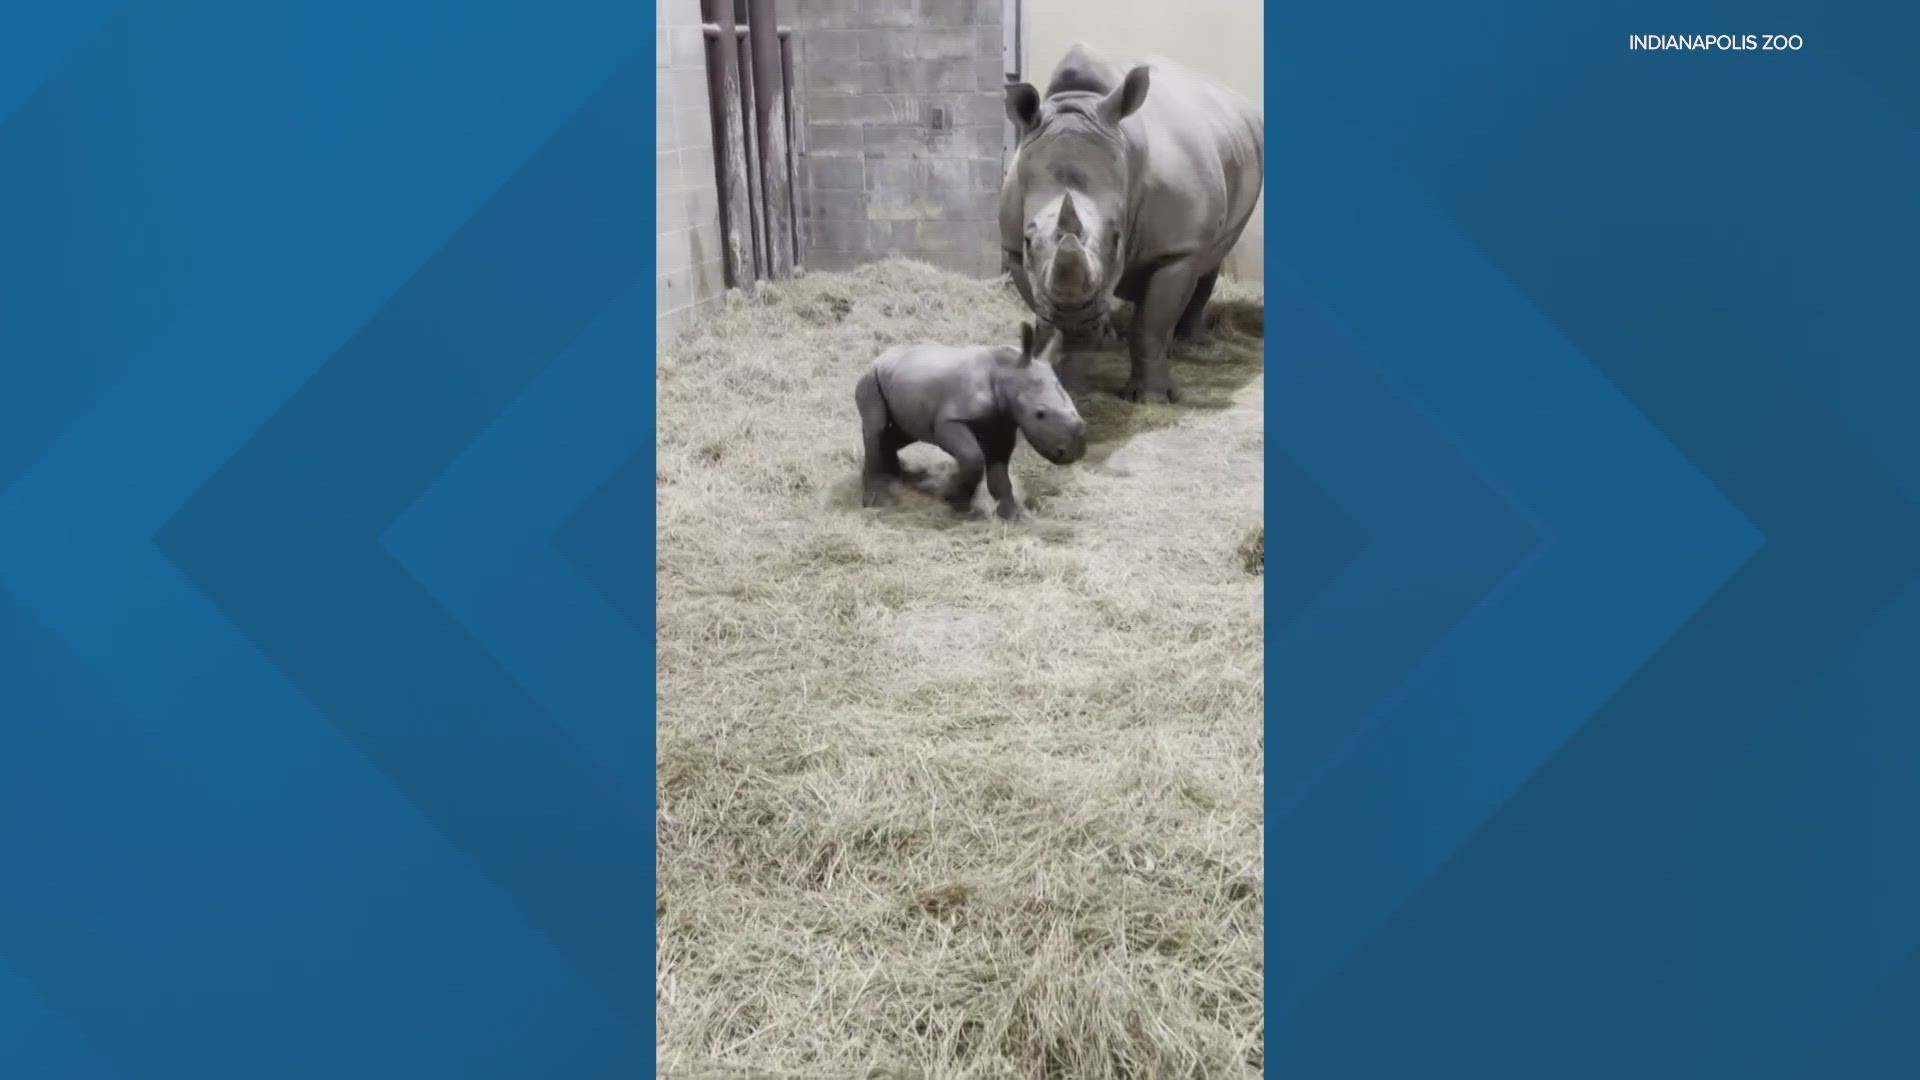 The zoo says the exclusive encounter offers a behind-the-scenes look at mom Zenzele and her new calf.